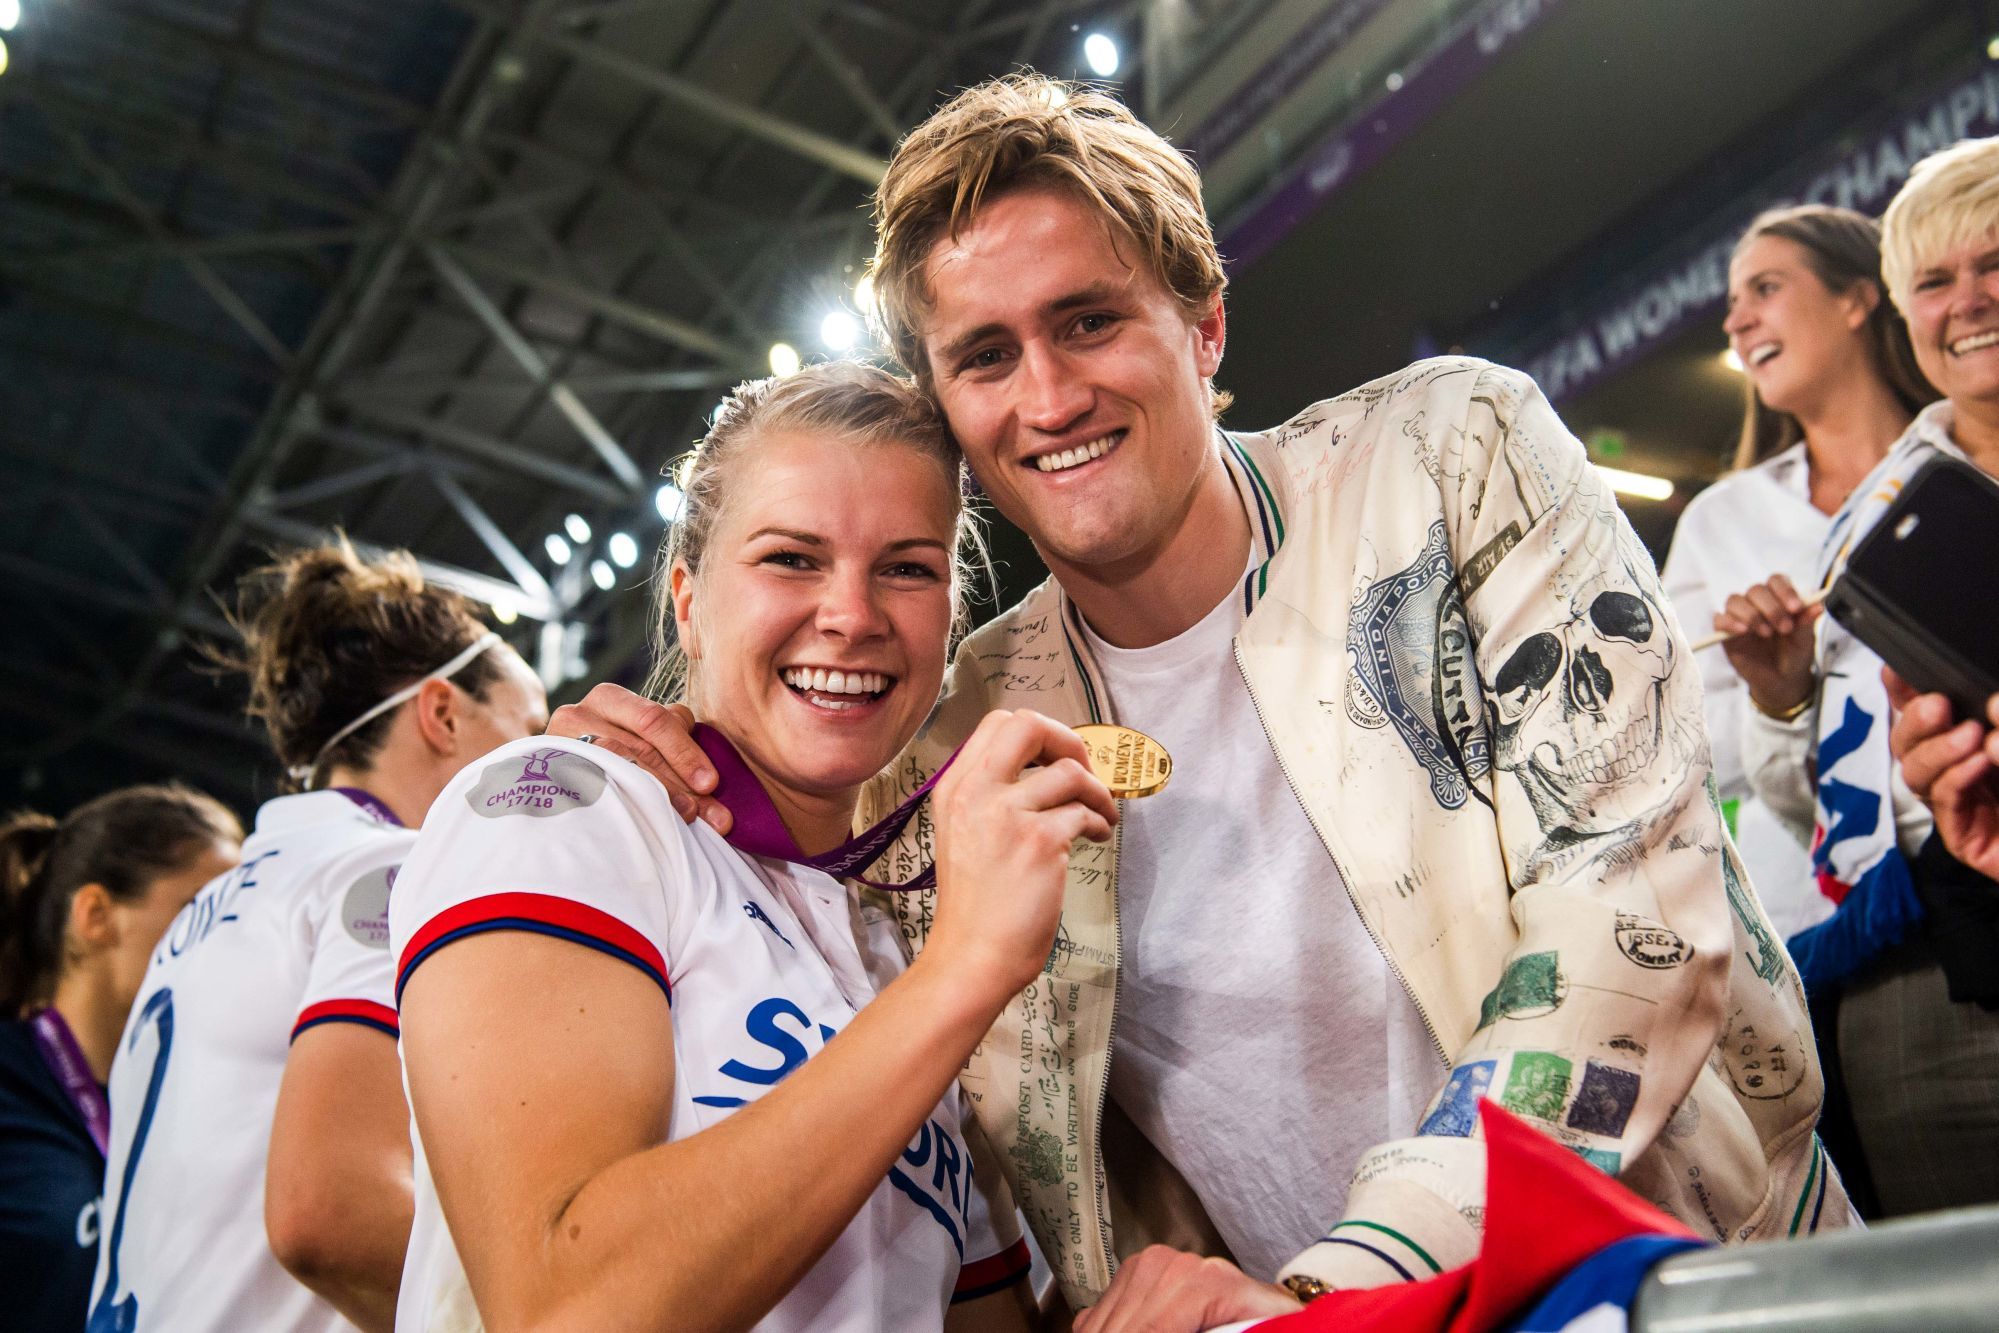 Ada Hegerberg of Lyon celebrate with her boyfriend Thomas Rogne after the UEFA Women's Champions League final match between Lyon and Barcelona on May 18, 2019 in Budapest.
Photo: Jon Olav Nesvold / Bildbyran / Icon Sport